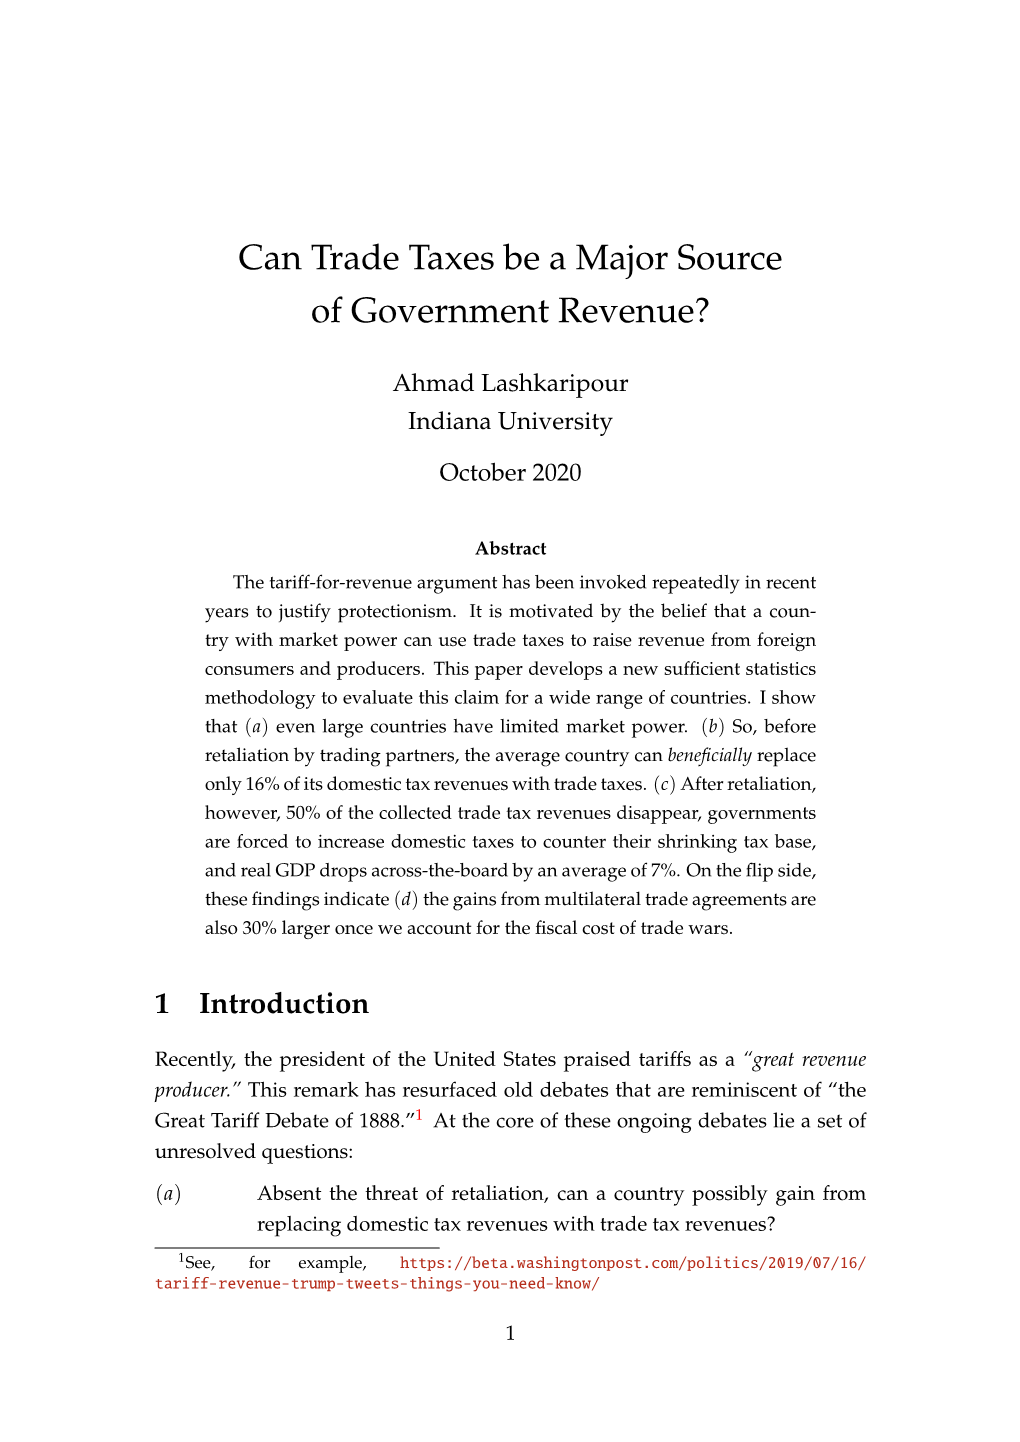 Can Trade Taxes Be a Major Source of Government Revenue?